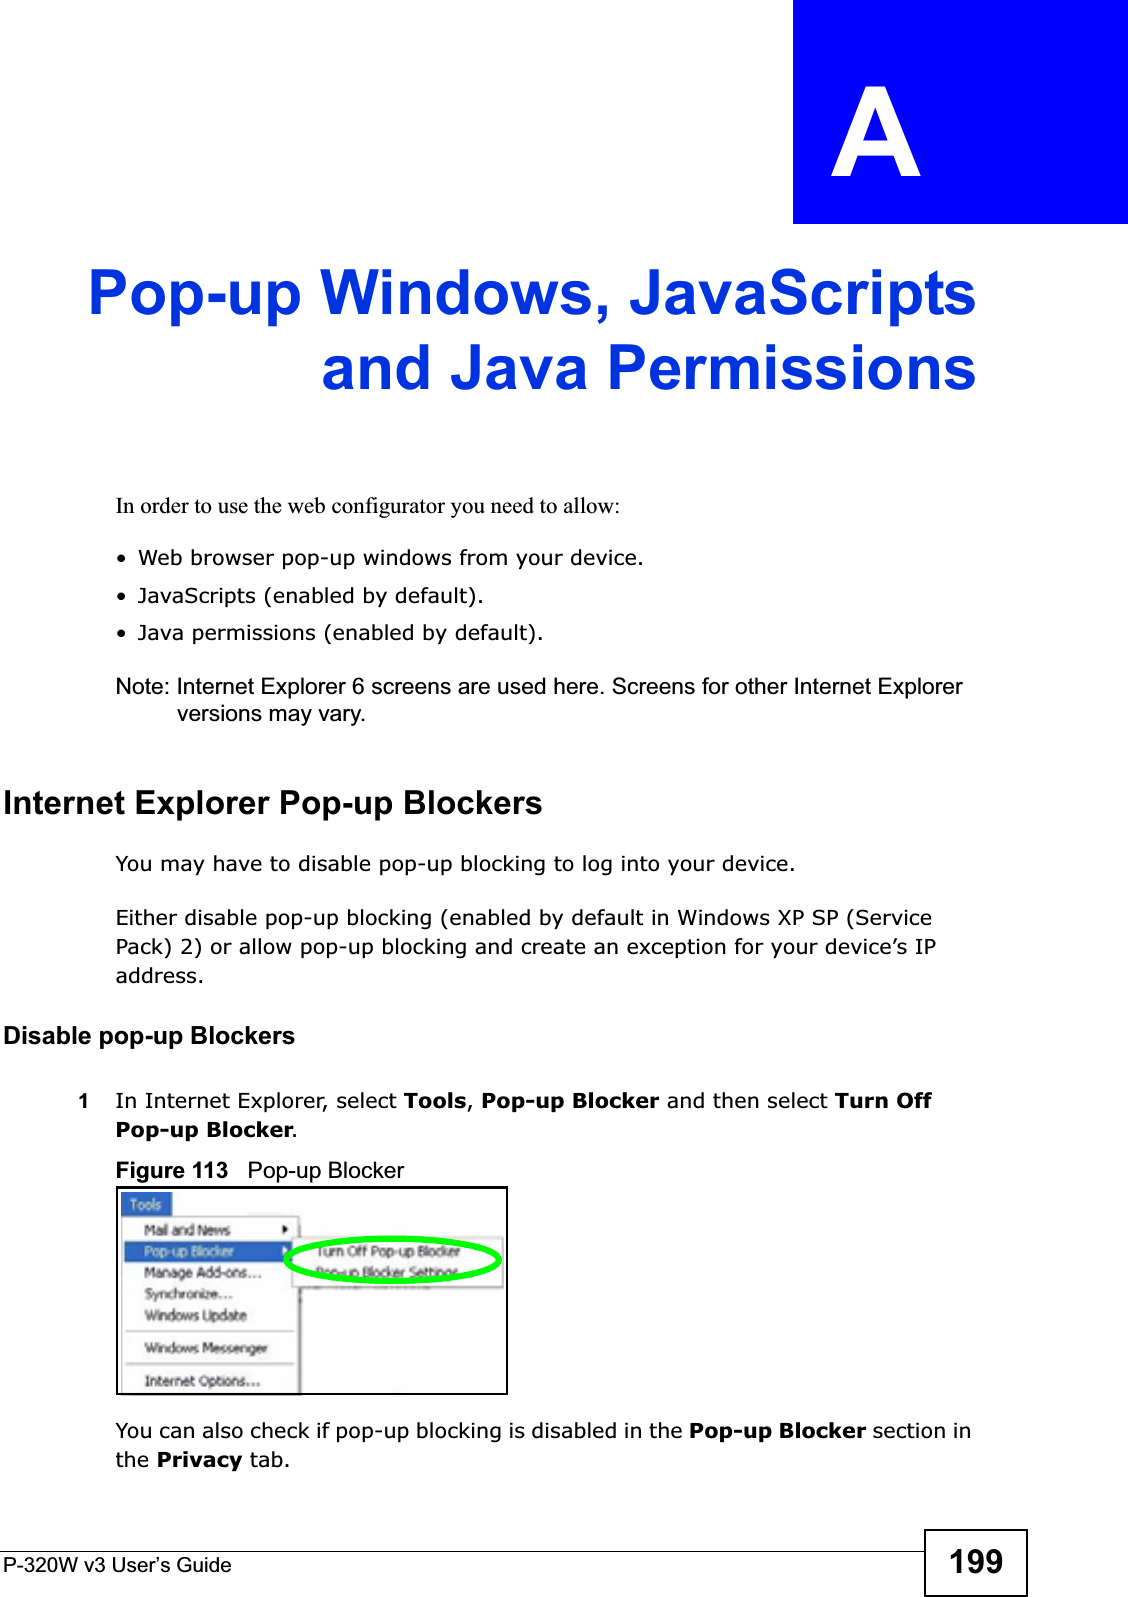 P-320W v3 User’s Guide 199APPENDIX  A Pop-up Windows, JavaScriptsand Java PermissionsIn order to use the web configurator you need to allow:• Web browser pop-up windows from your device.• JavaScripts (enabled by default).• Java permissions (enabled by default).Note: Internet Explorer 6 screens are used here. Screens for other Internet Explorer versions may vary.Internet Explorer Pop-up BlockersYou may have to disable pop-up blocking to log into your device. Either disable pop-up blocking (enabled by default in Windows XP SP (Service Pack) 2) or allow pop-up blocking and create an exception for your device’s IP address.Disable pop-up Blockers1In Internet Explorer, select Tools,Pop-up Blocker and then select Turn Off Pop-up Blocker.Figure 113   Pop-up BlockerYou can also check if pop-up blocking is disabled in the Pop-up Blocker section in the Privacy tab. 